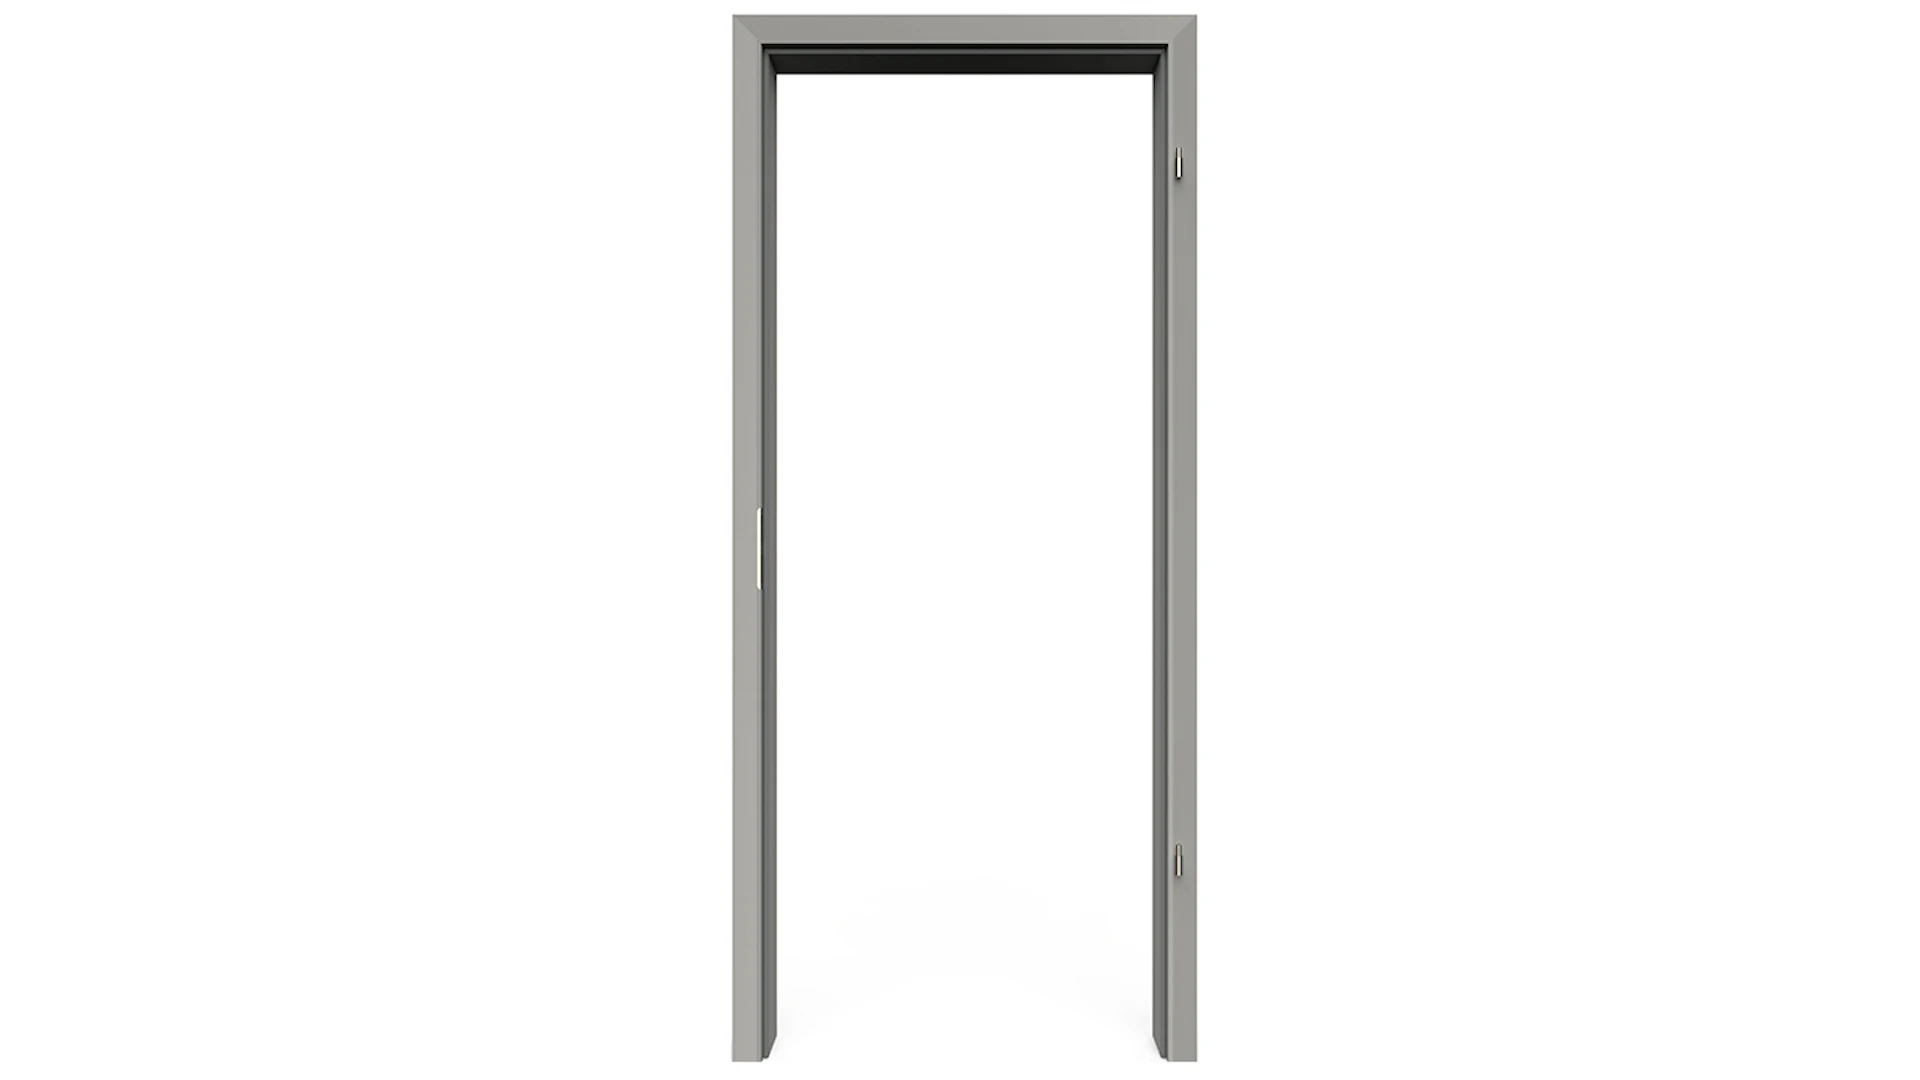 planeo Standard frame, rounded edge - CPL Silver grey - 2110 x 860 x 200 mm DIN Right